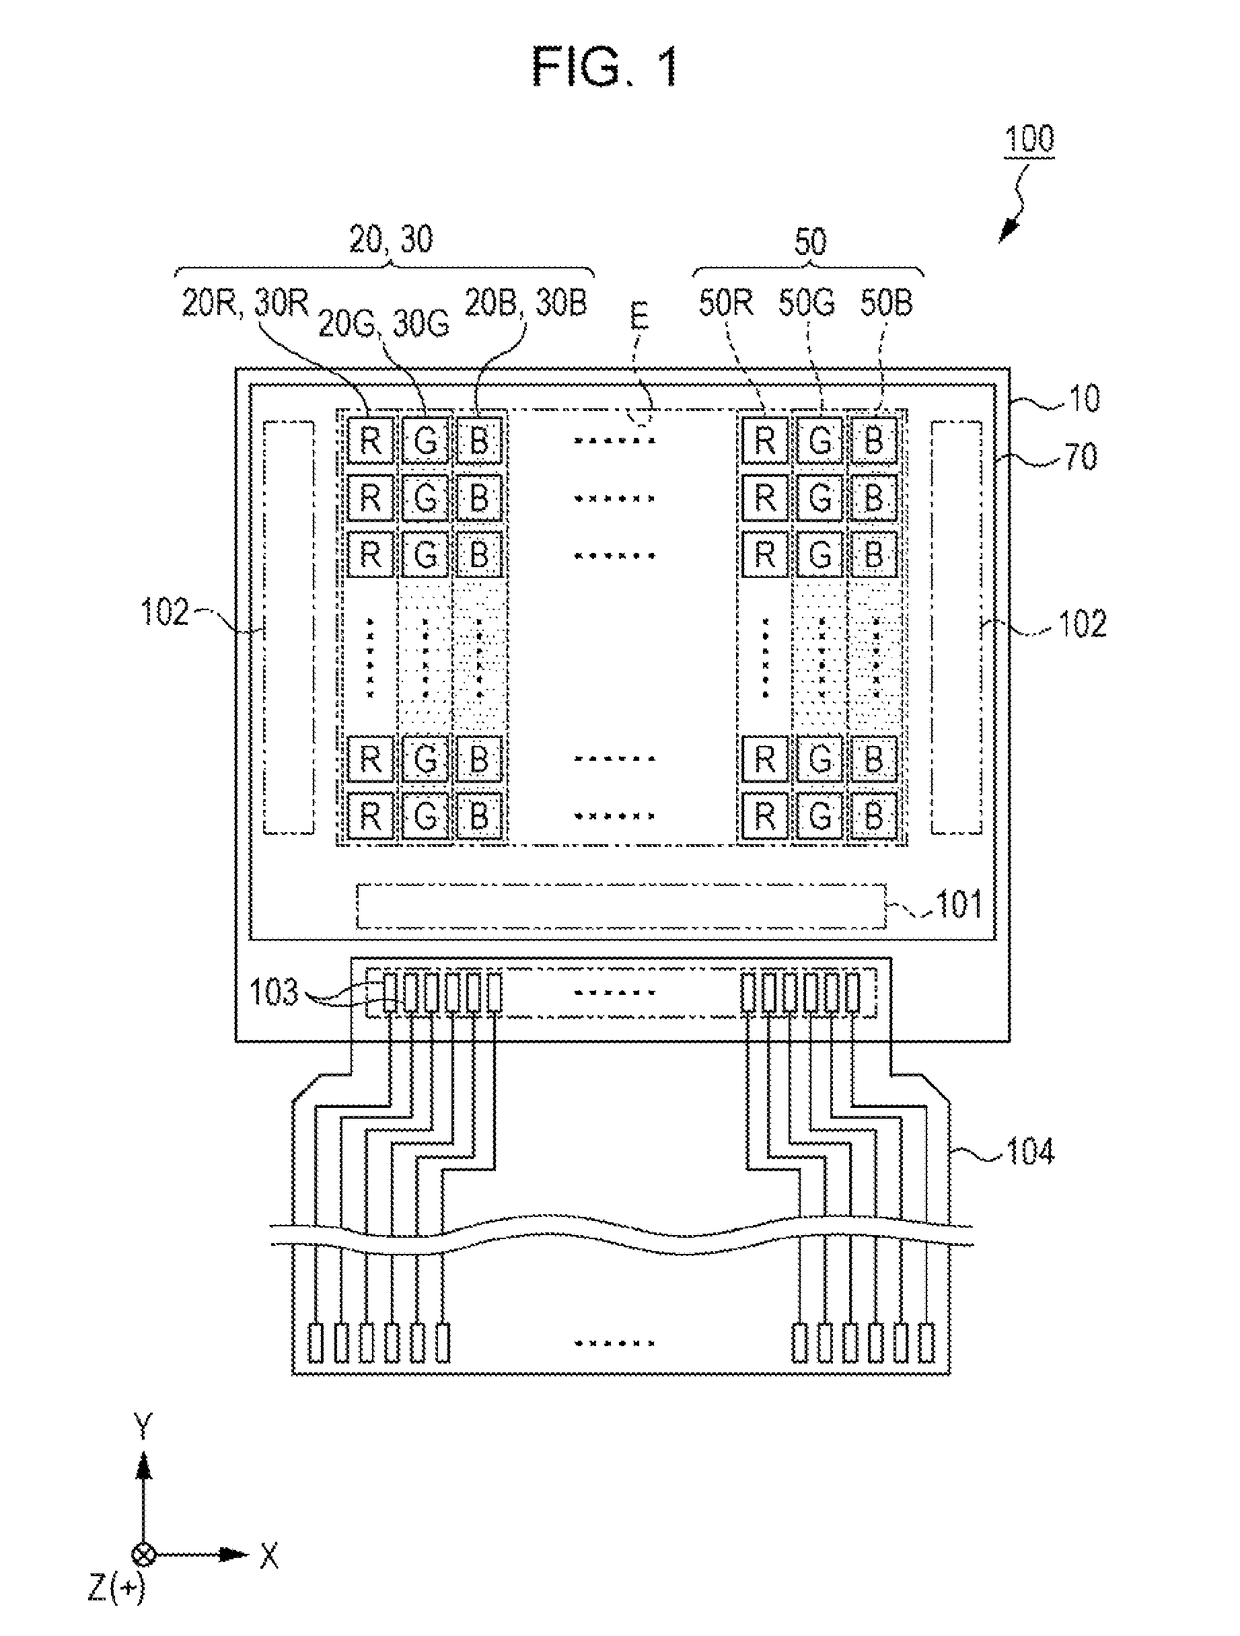 Electro-optical apparatus, manufacturing method thereof, and electronic device